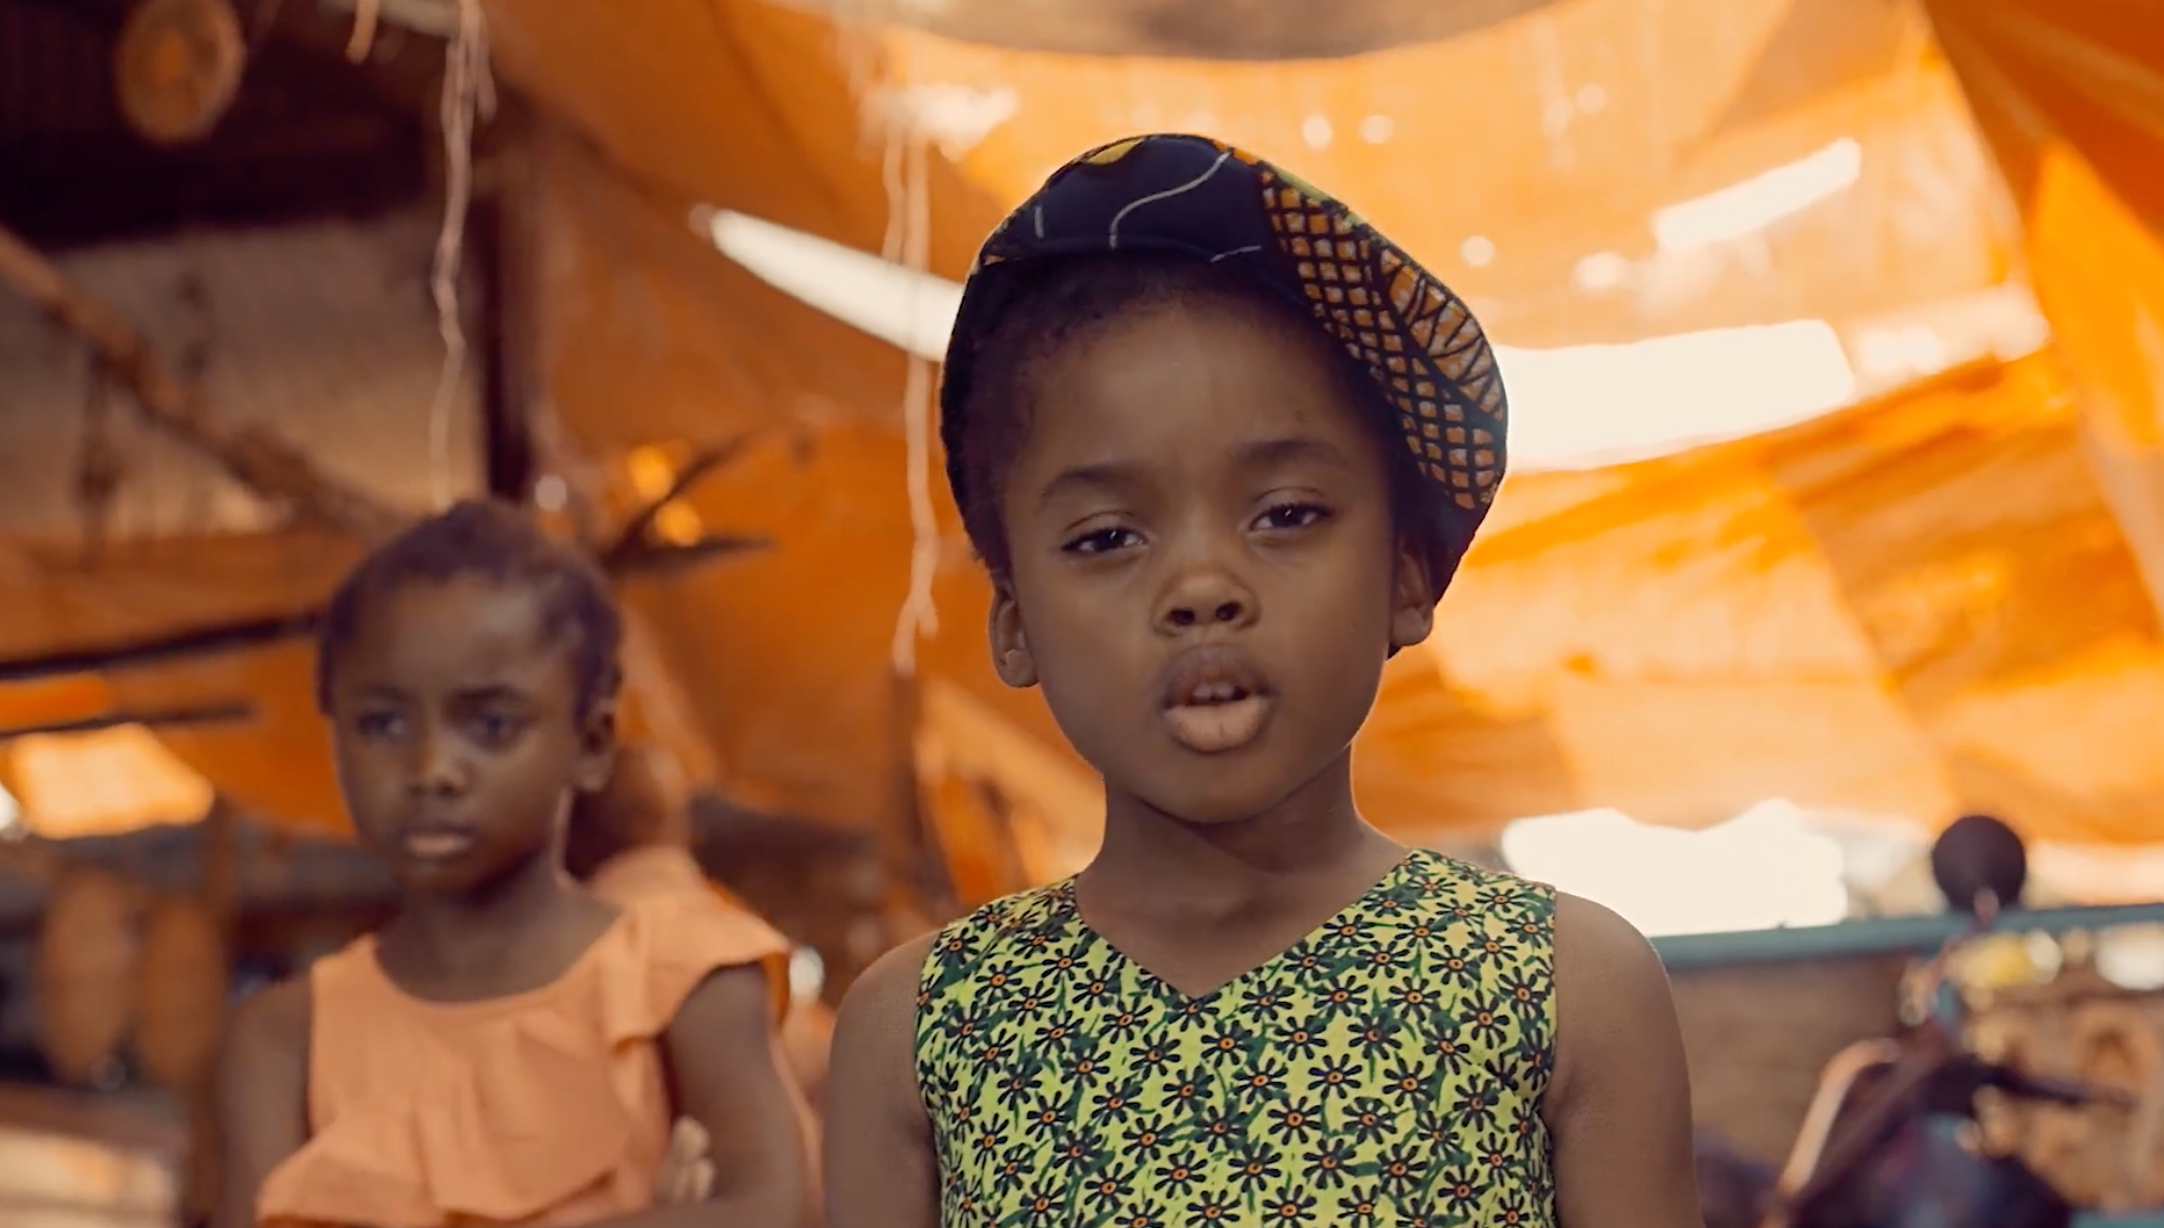 Celebrate International Day Of The Girl With This Powerful Rendition Of Beyoncé's 'Freedom'
